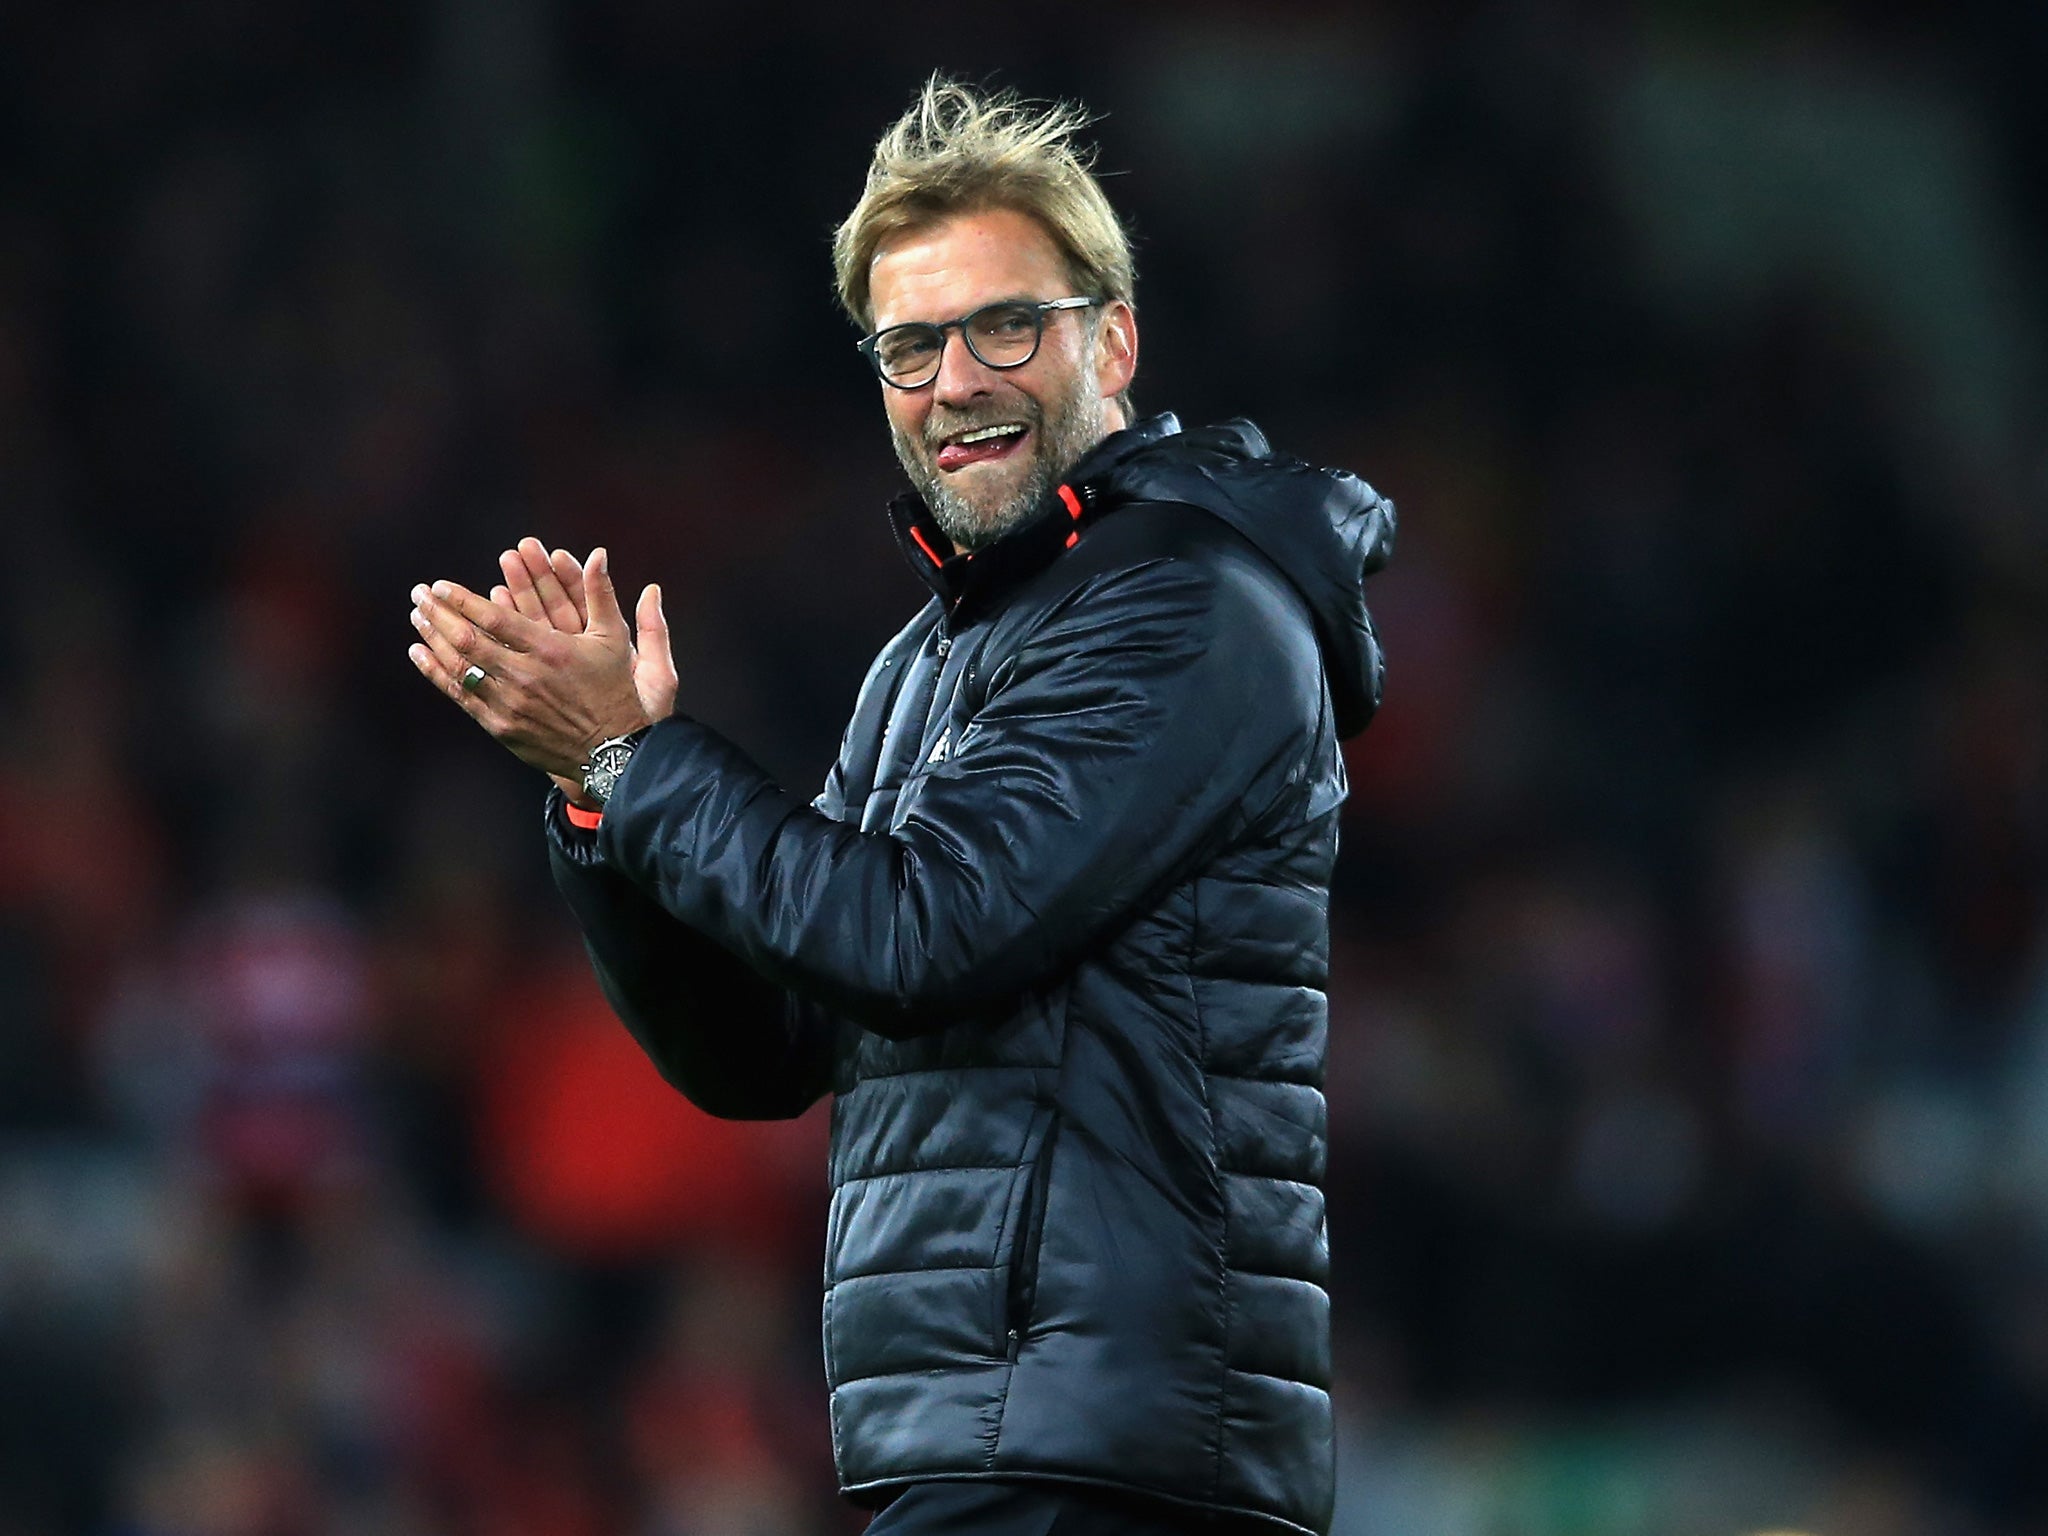 Klopp was pleased with the manner of Liverpool's win, despite conceding late on